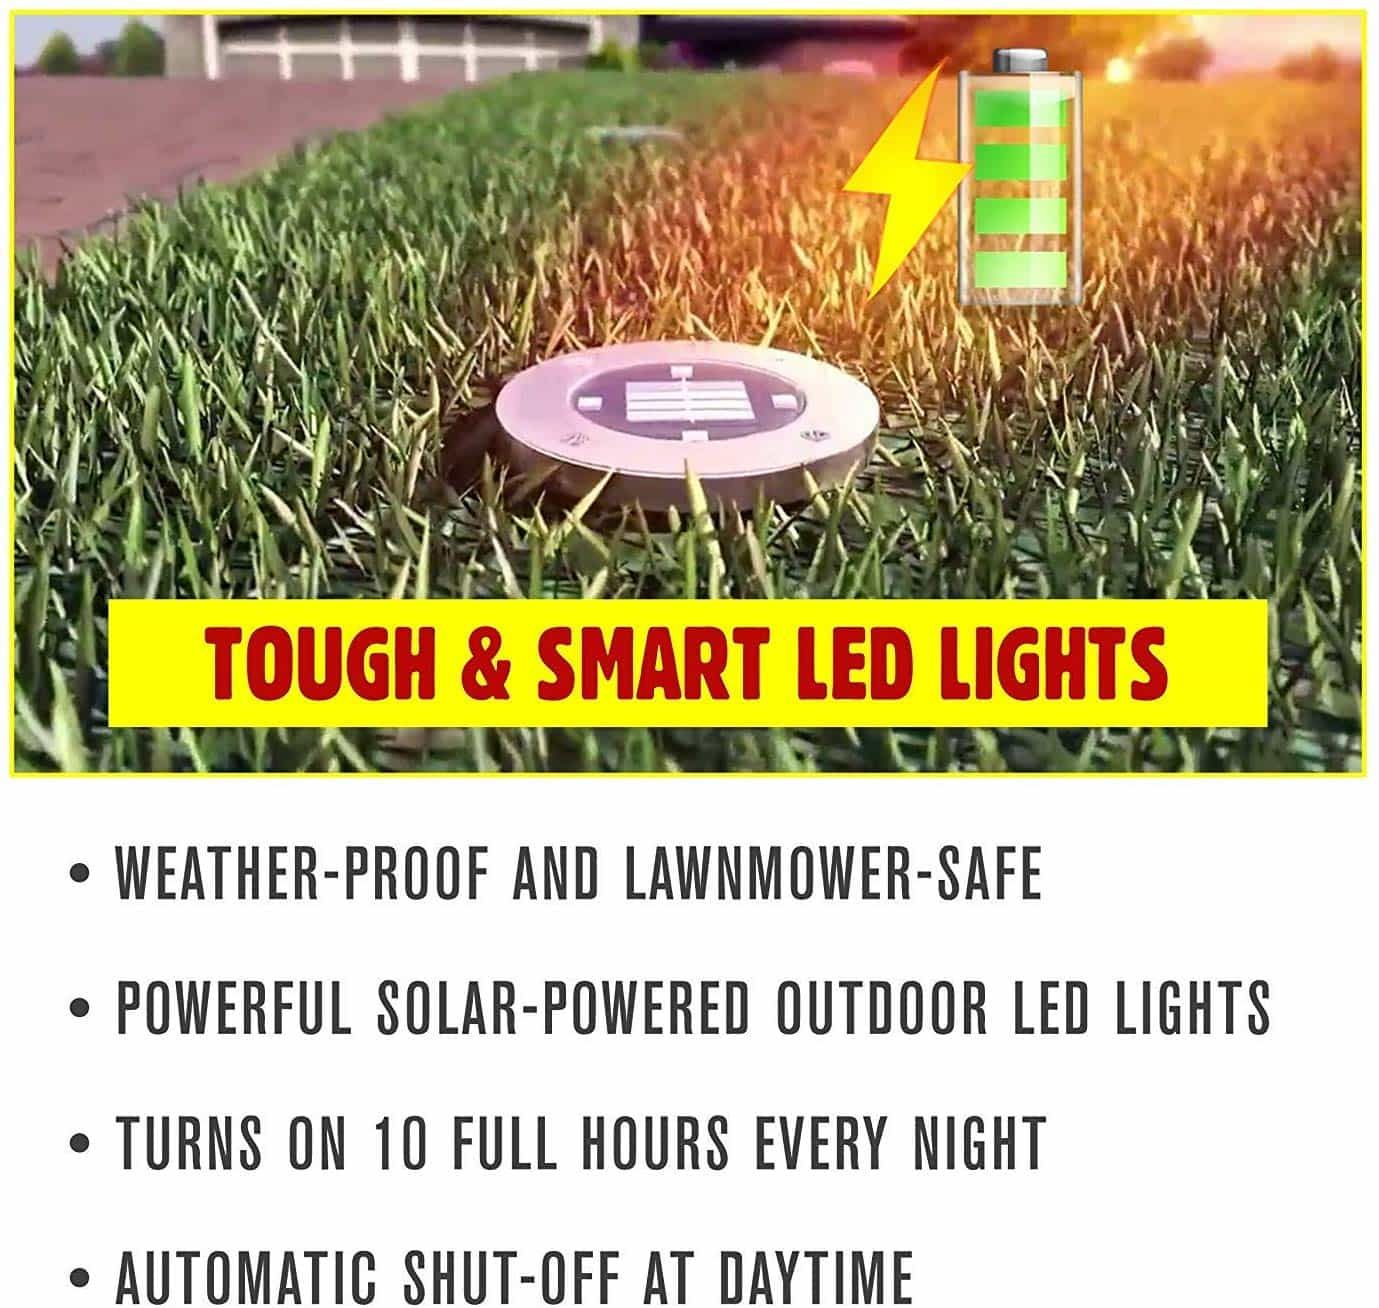 Bell + Howell Disk Light with battery sign on his side and features - Weather - proof and lawnmower-safe + Powerful solar-powered outdoor led lights + Turns on 10 full hours every night + Automatic shut-off at daytime